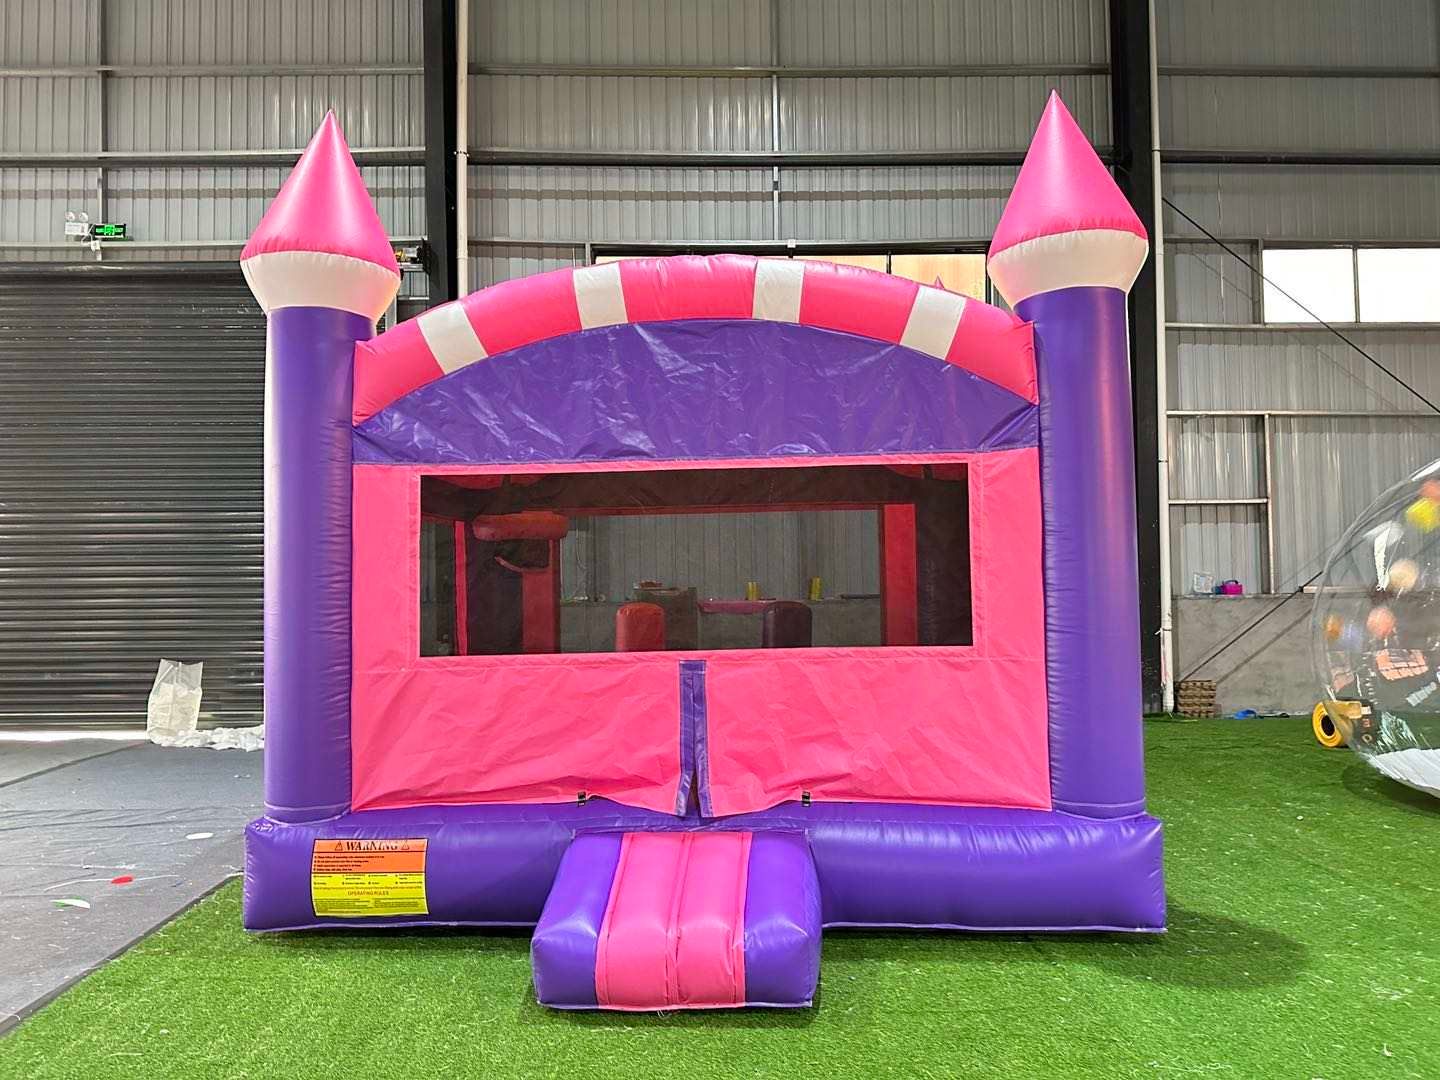 Pink and Purple Bouncy Castle | Rancho Cucamonga, CA | Jam Jam Bounce House & Inflatable Party Rentals